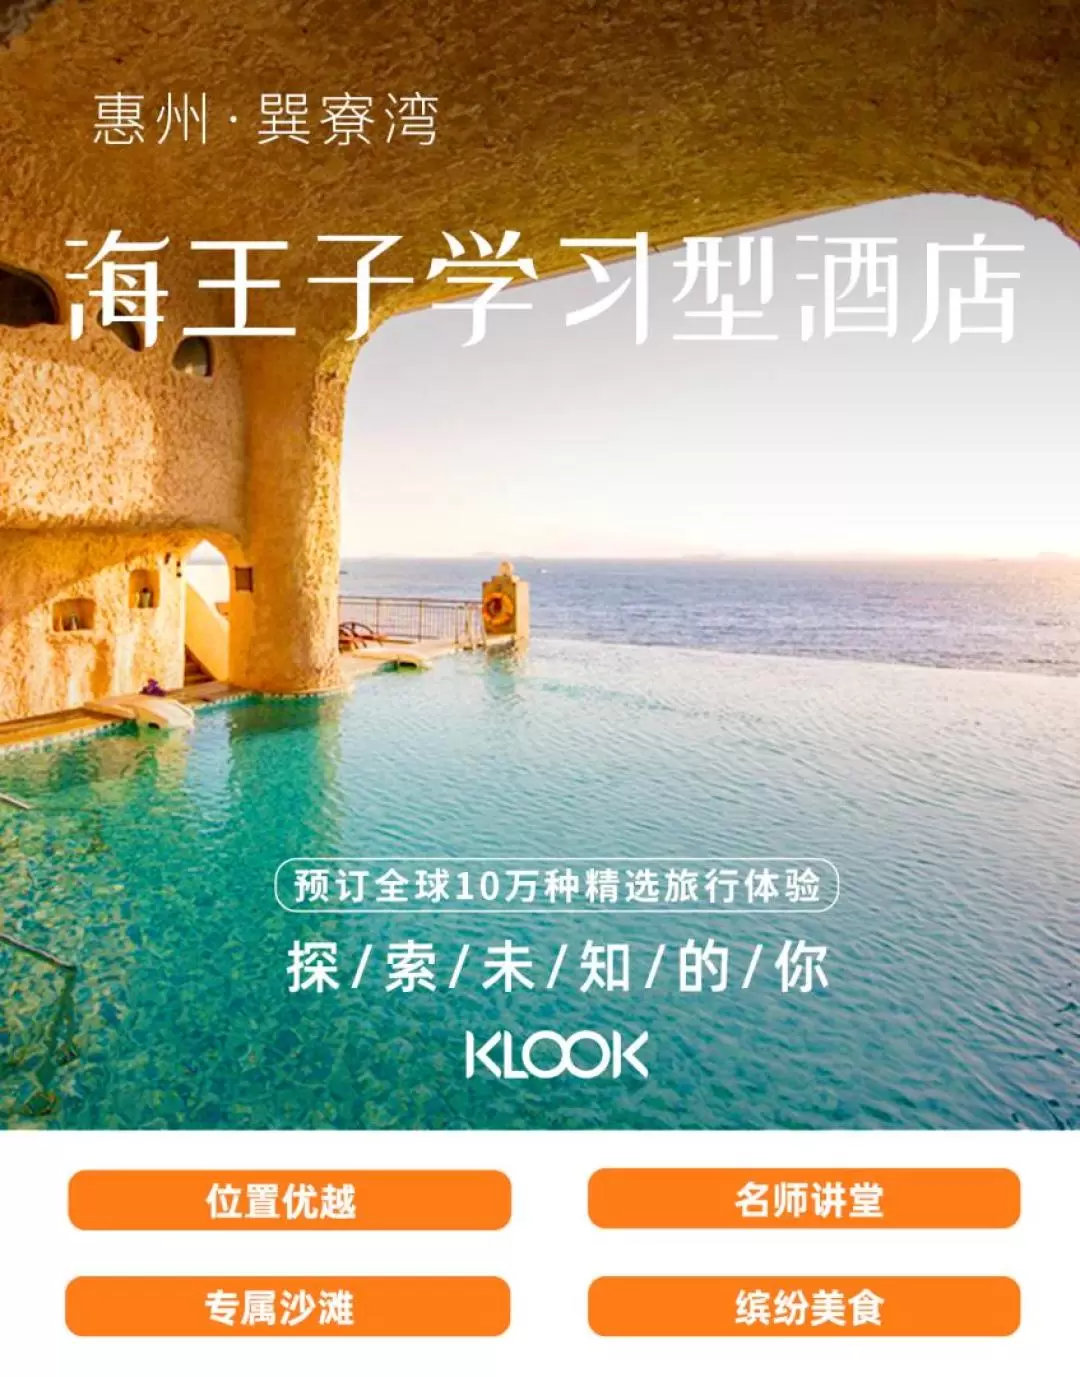 [Limited time rush] Huizhou Xunliao Bay Sea Prince Learning Hotel (Cave internet celebrity swimming pool check-in)